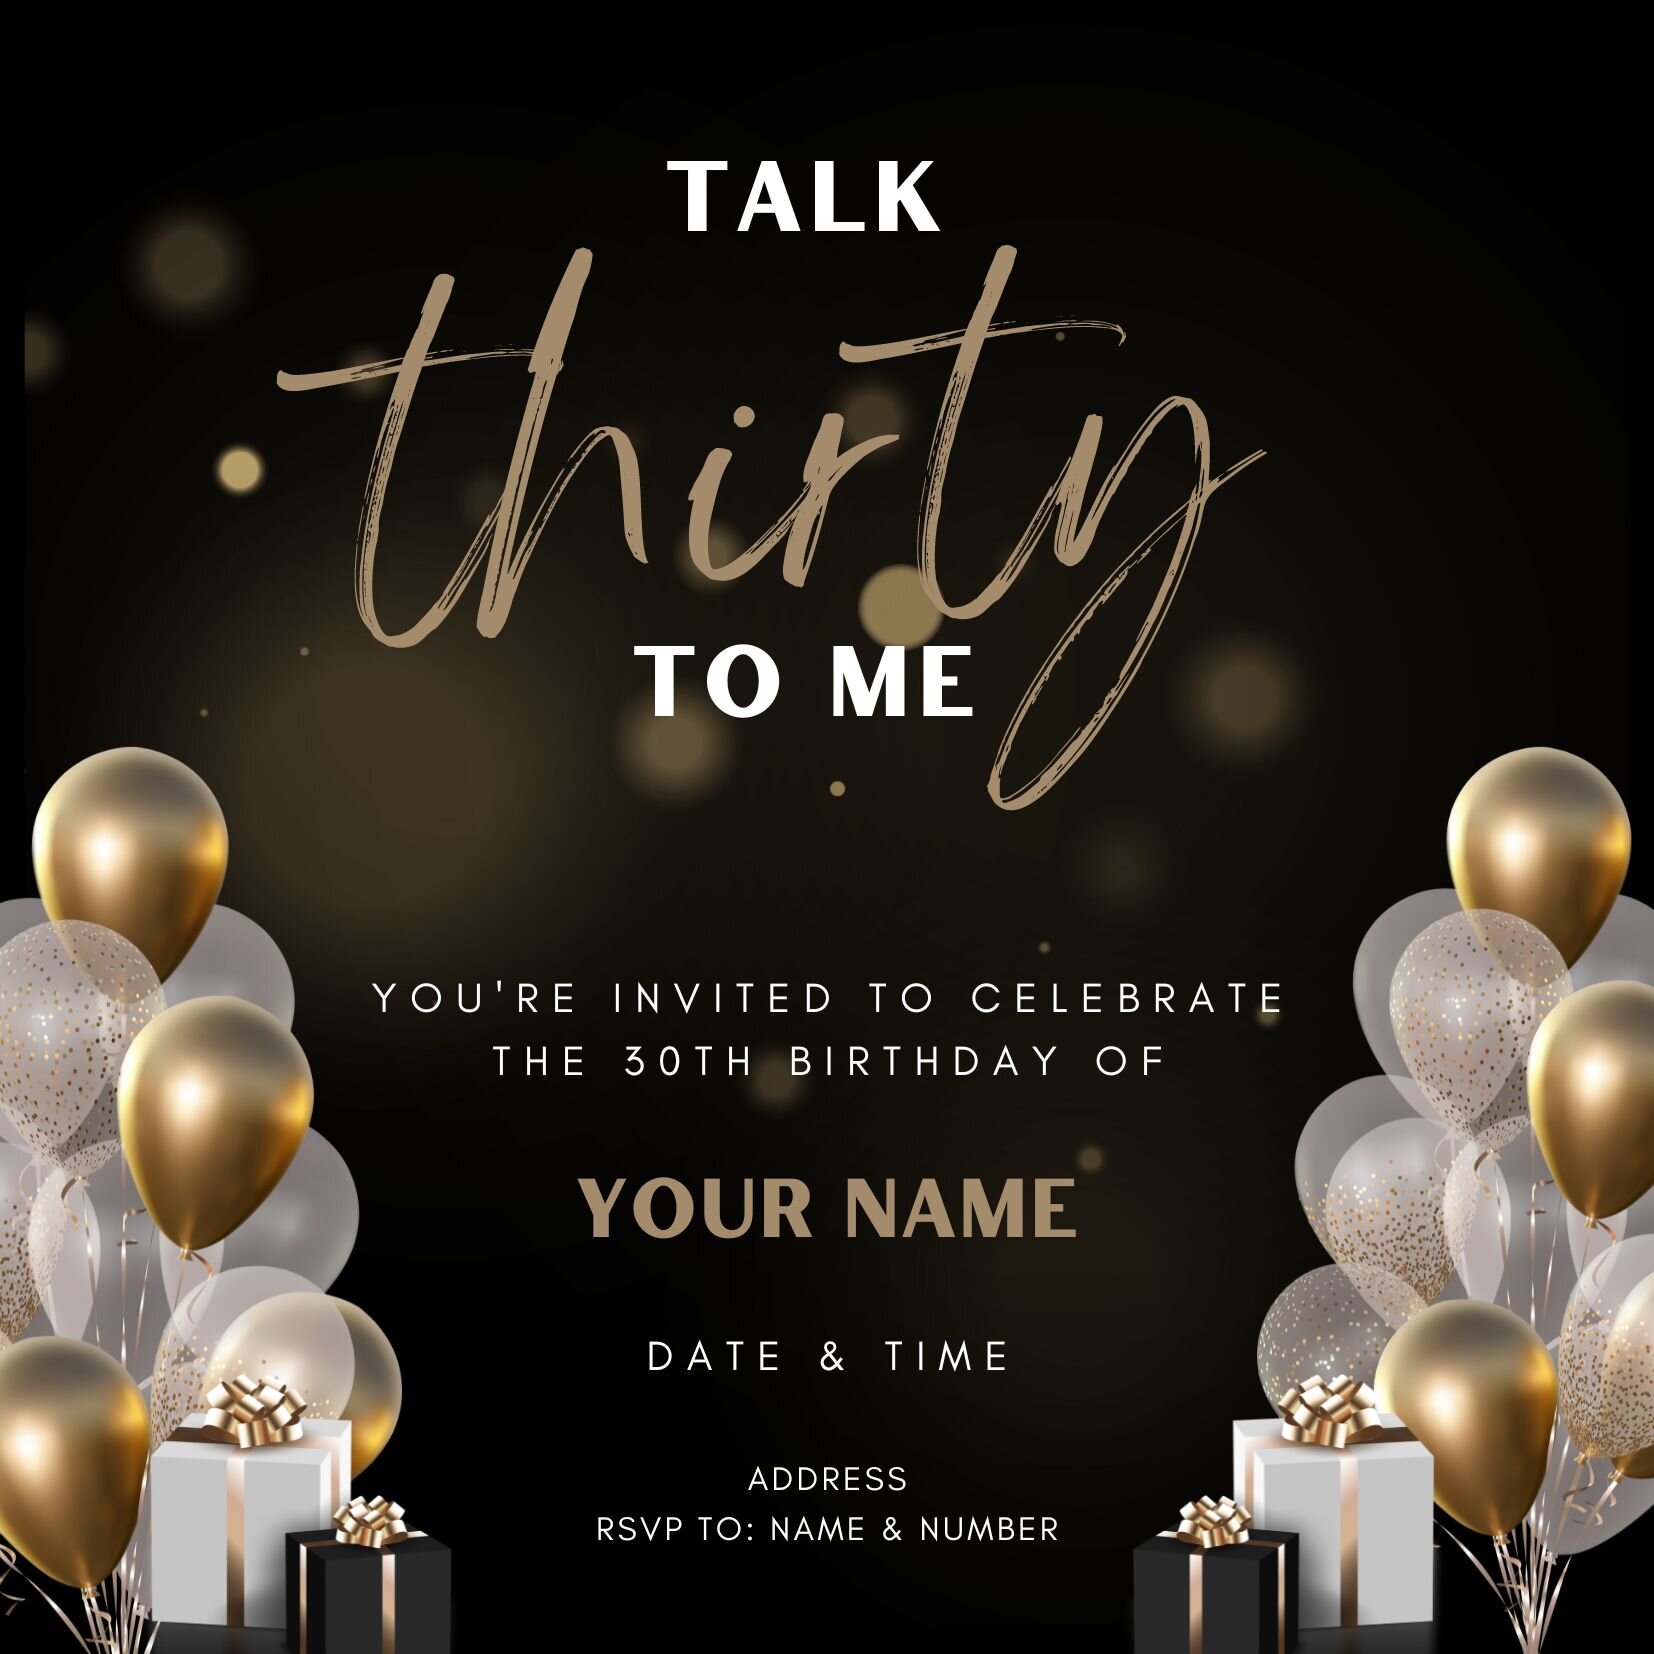 Custom invitation designs for every occasion! Birthdays, Weddings, Baby Showers, Save the Dates, Social Events - Whatever the need! Contact me when you're planning your next event. 

DESIGNSBYDANNIE.COM
.
.
.
#custominvites #invitations #marketing #m